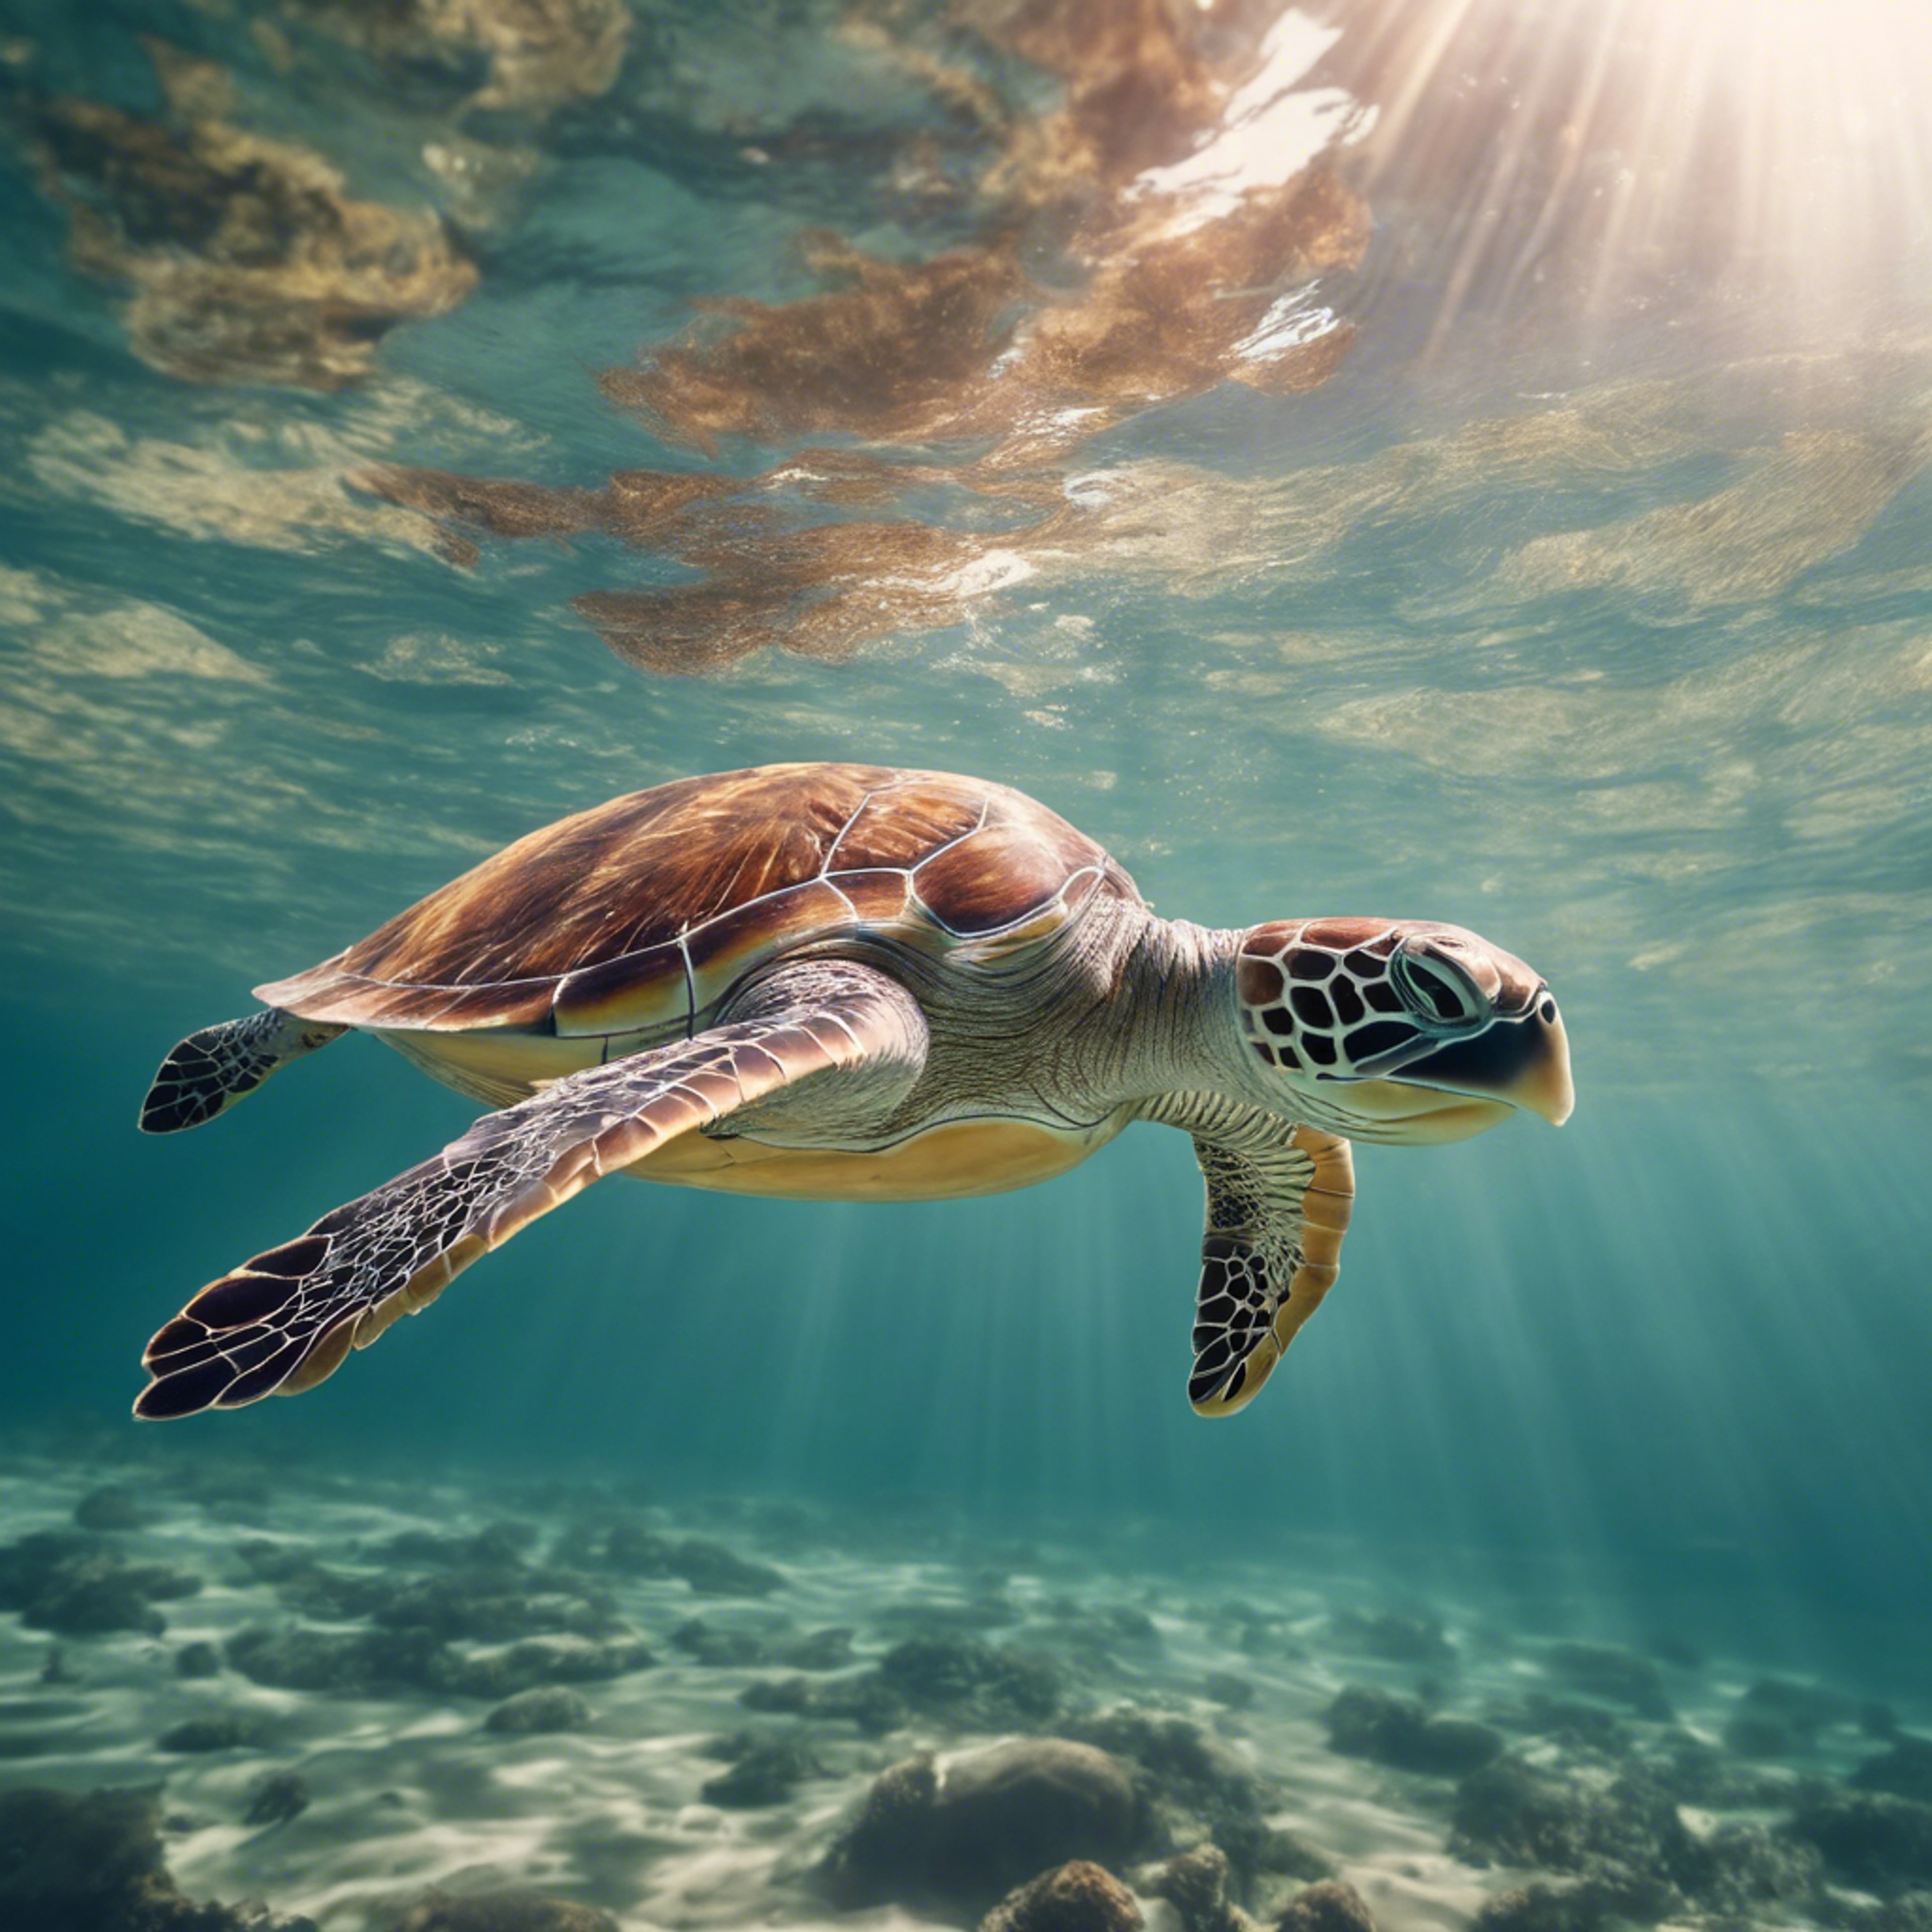 Sea turtle swimming leisurely in the ocean, with the sun penetrating the surface of the water above. Tapeta[52b0564e310d4ce7b781]